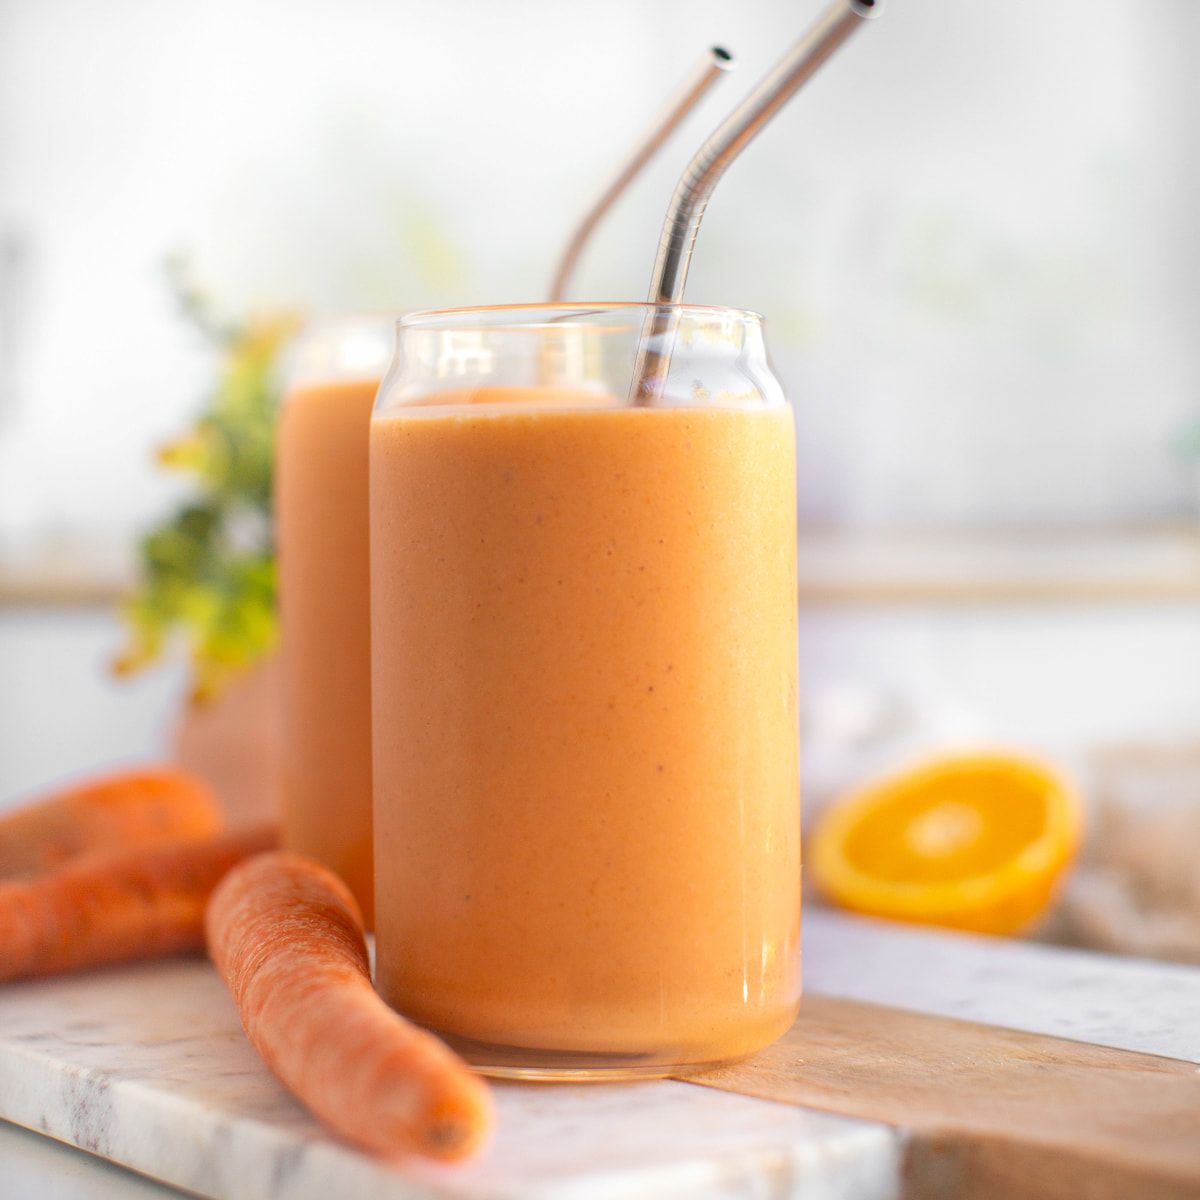 Creamy Carrot Smoothie with Mango and Banana